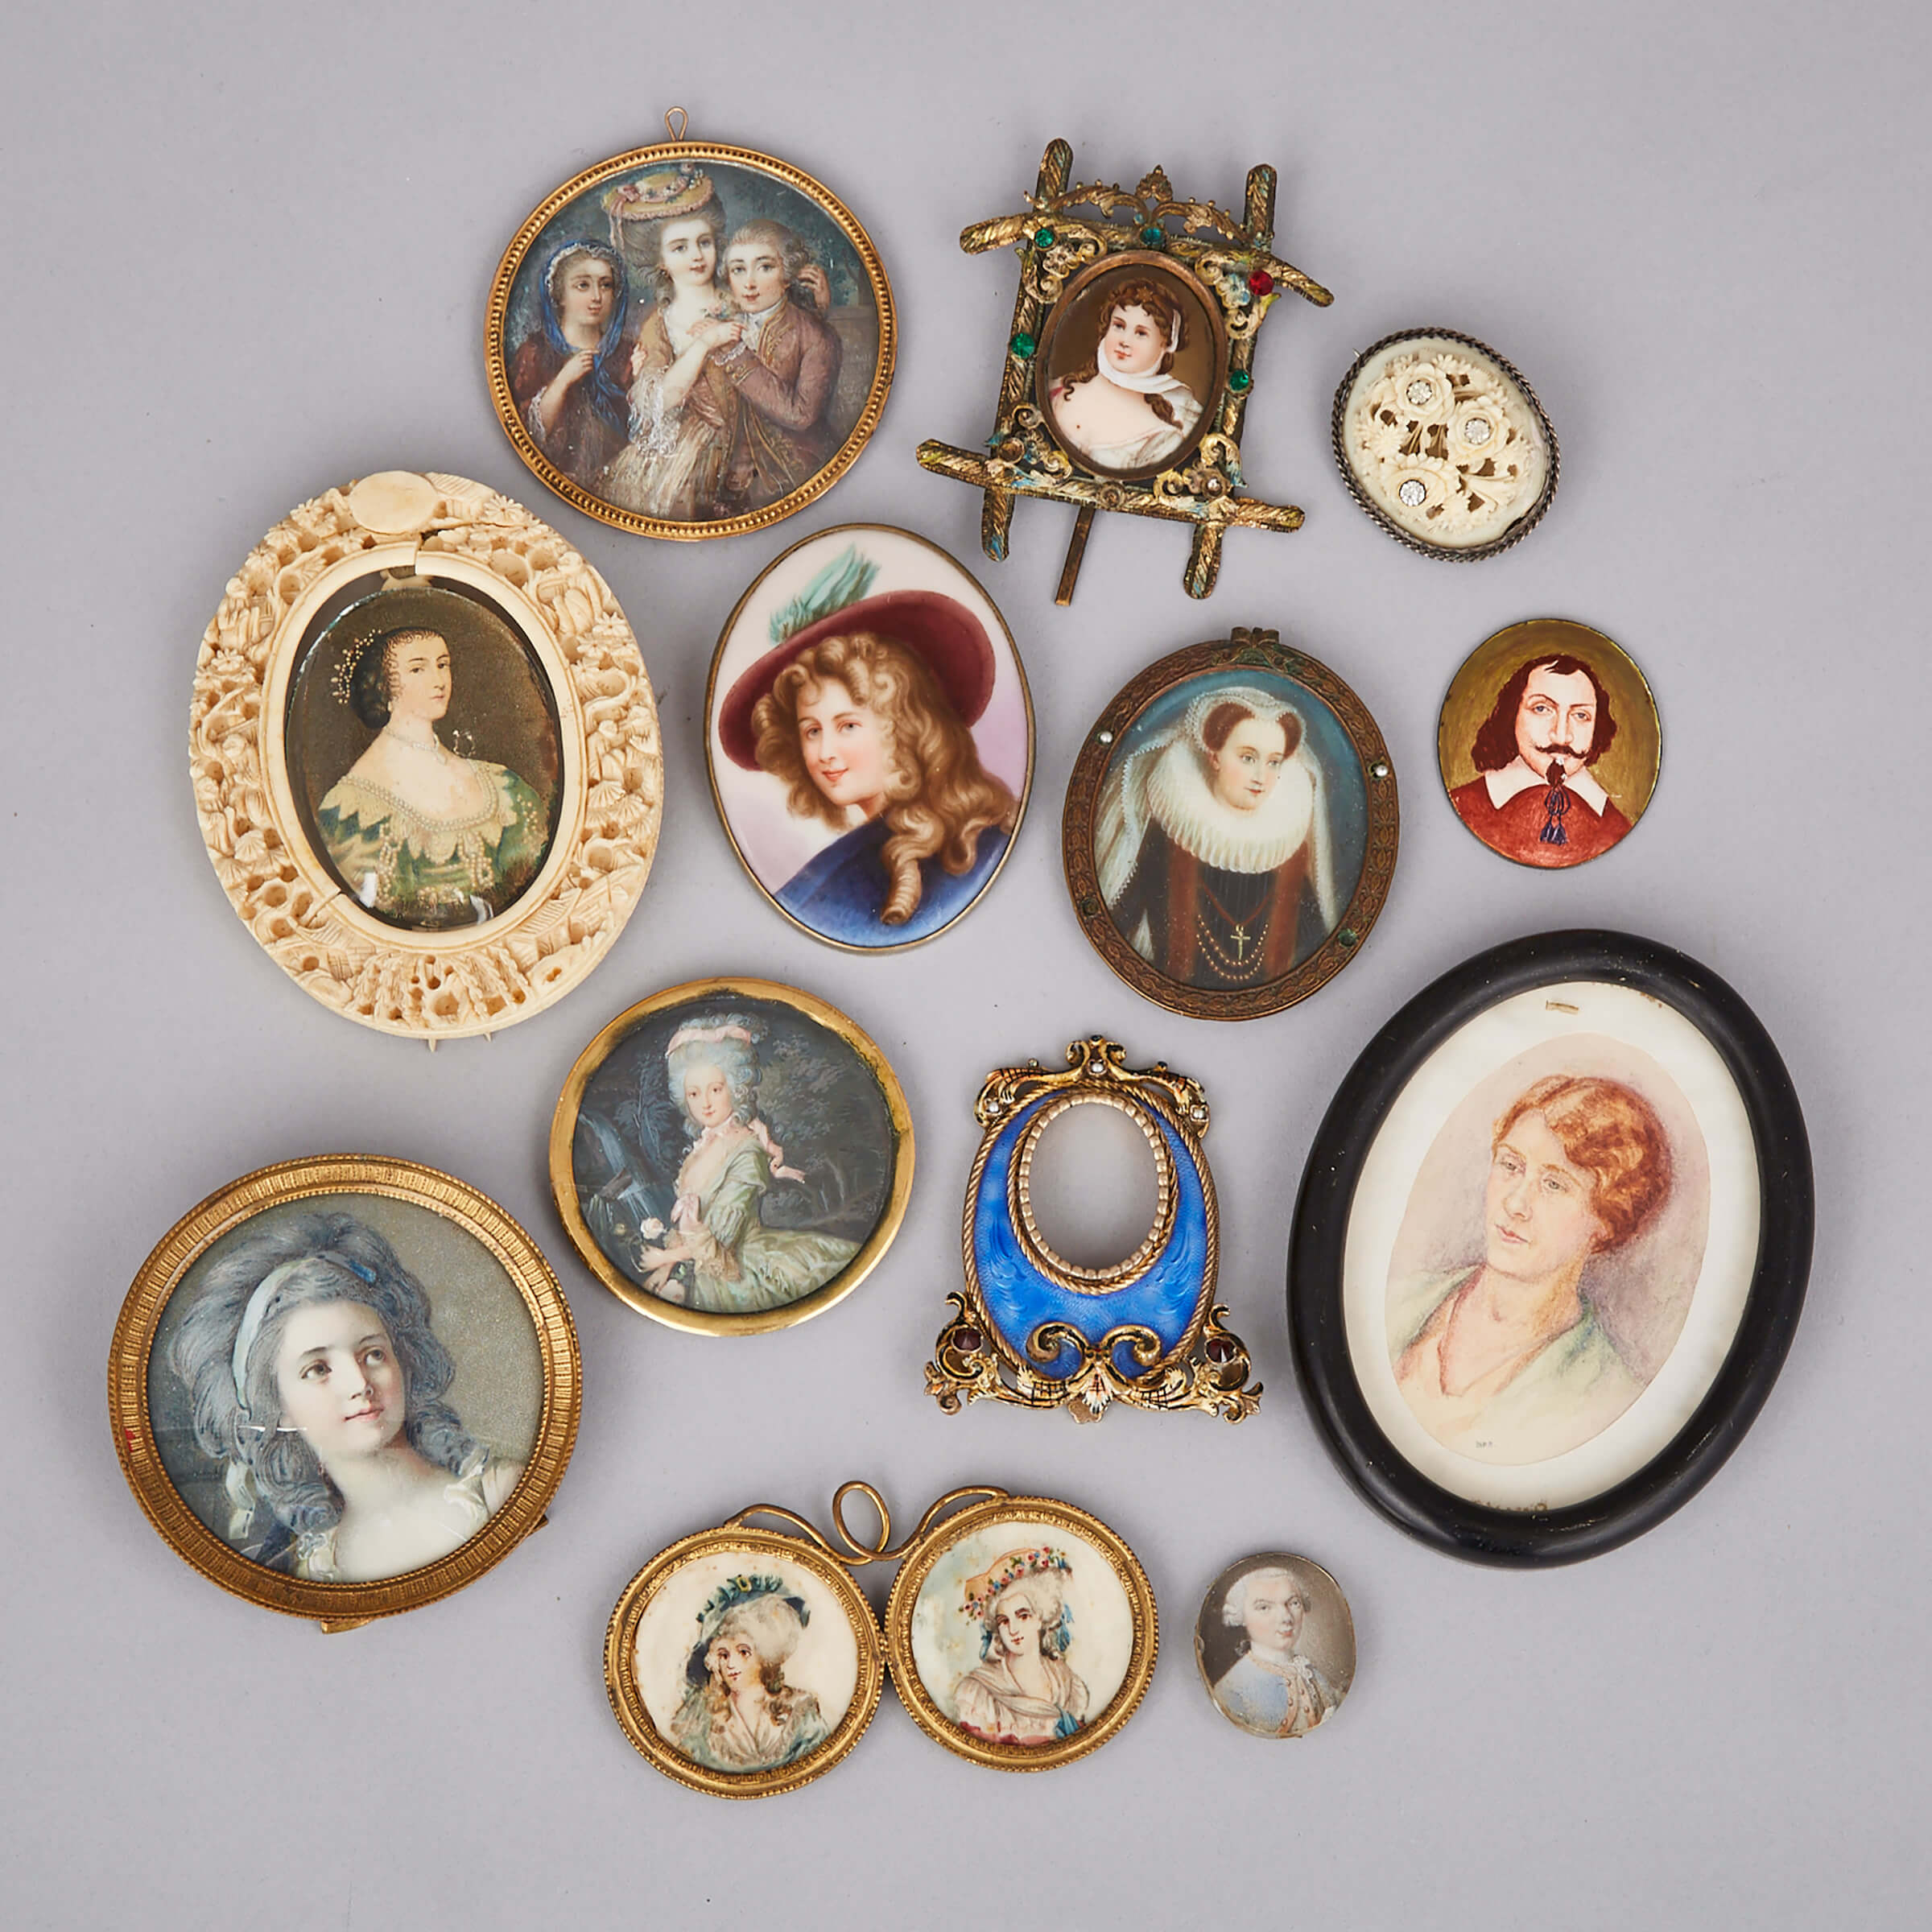 Miscellaneous Group of Portrait Miniatuares, 18th, 19th and early 20th centuries